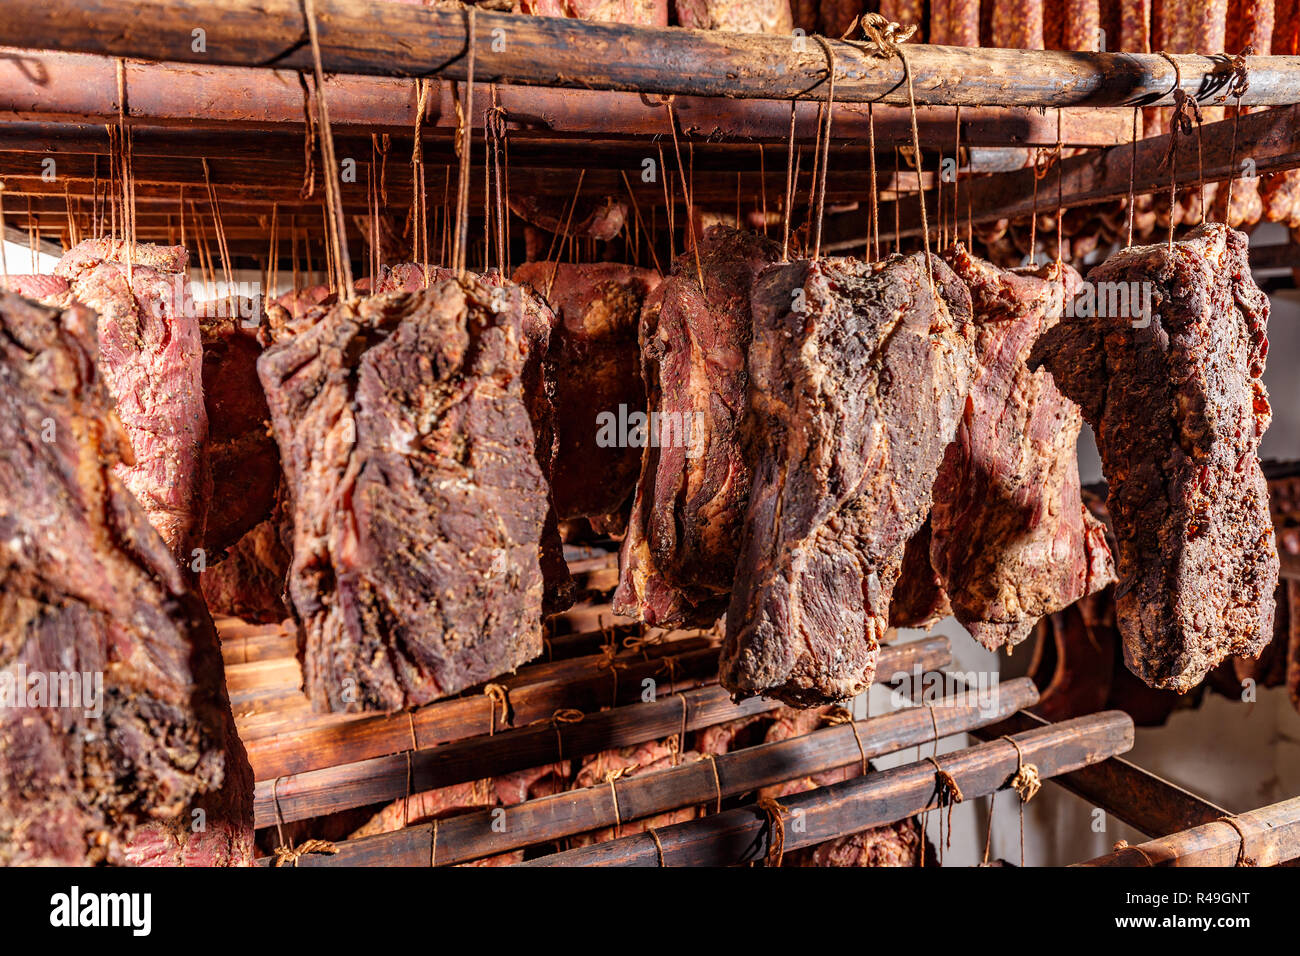 Smoked pork chop factory large amounts made at once on hooks in meat smoking chamber Stock Photo